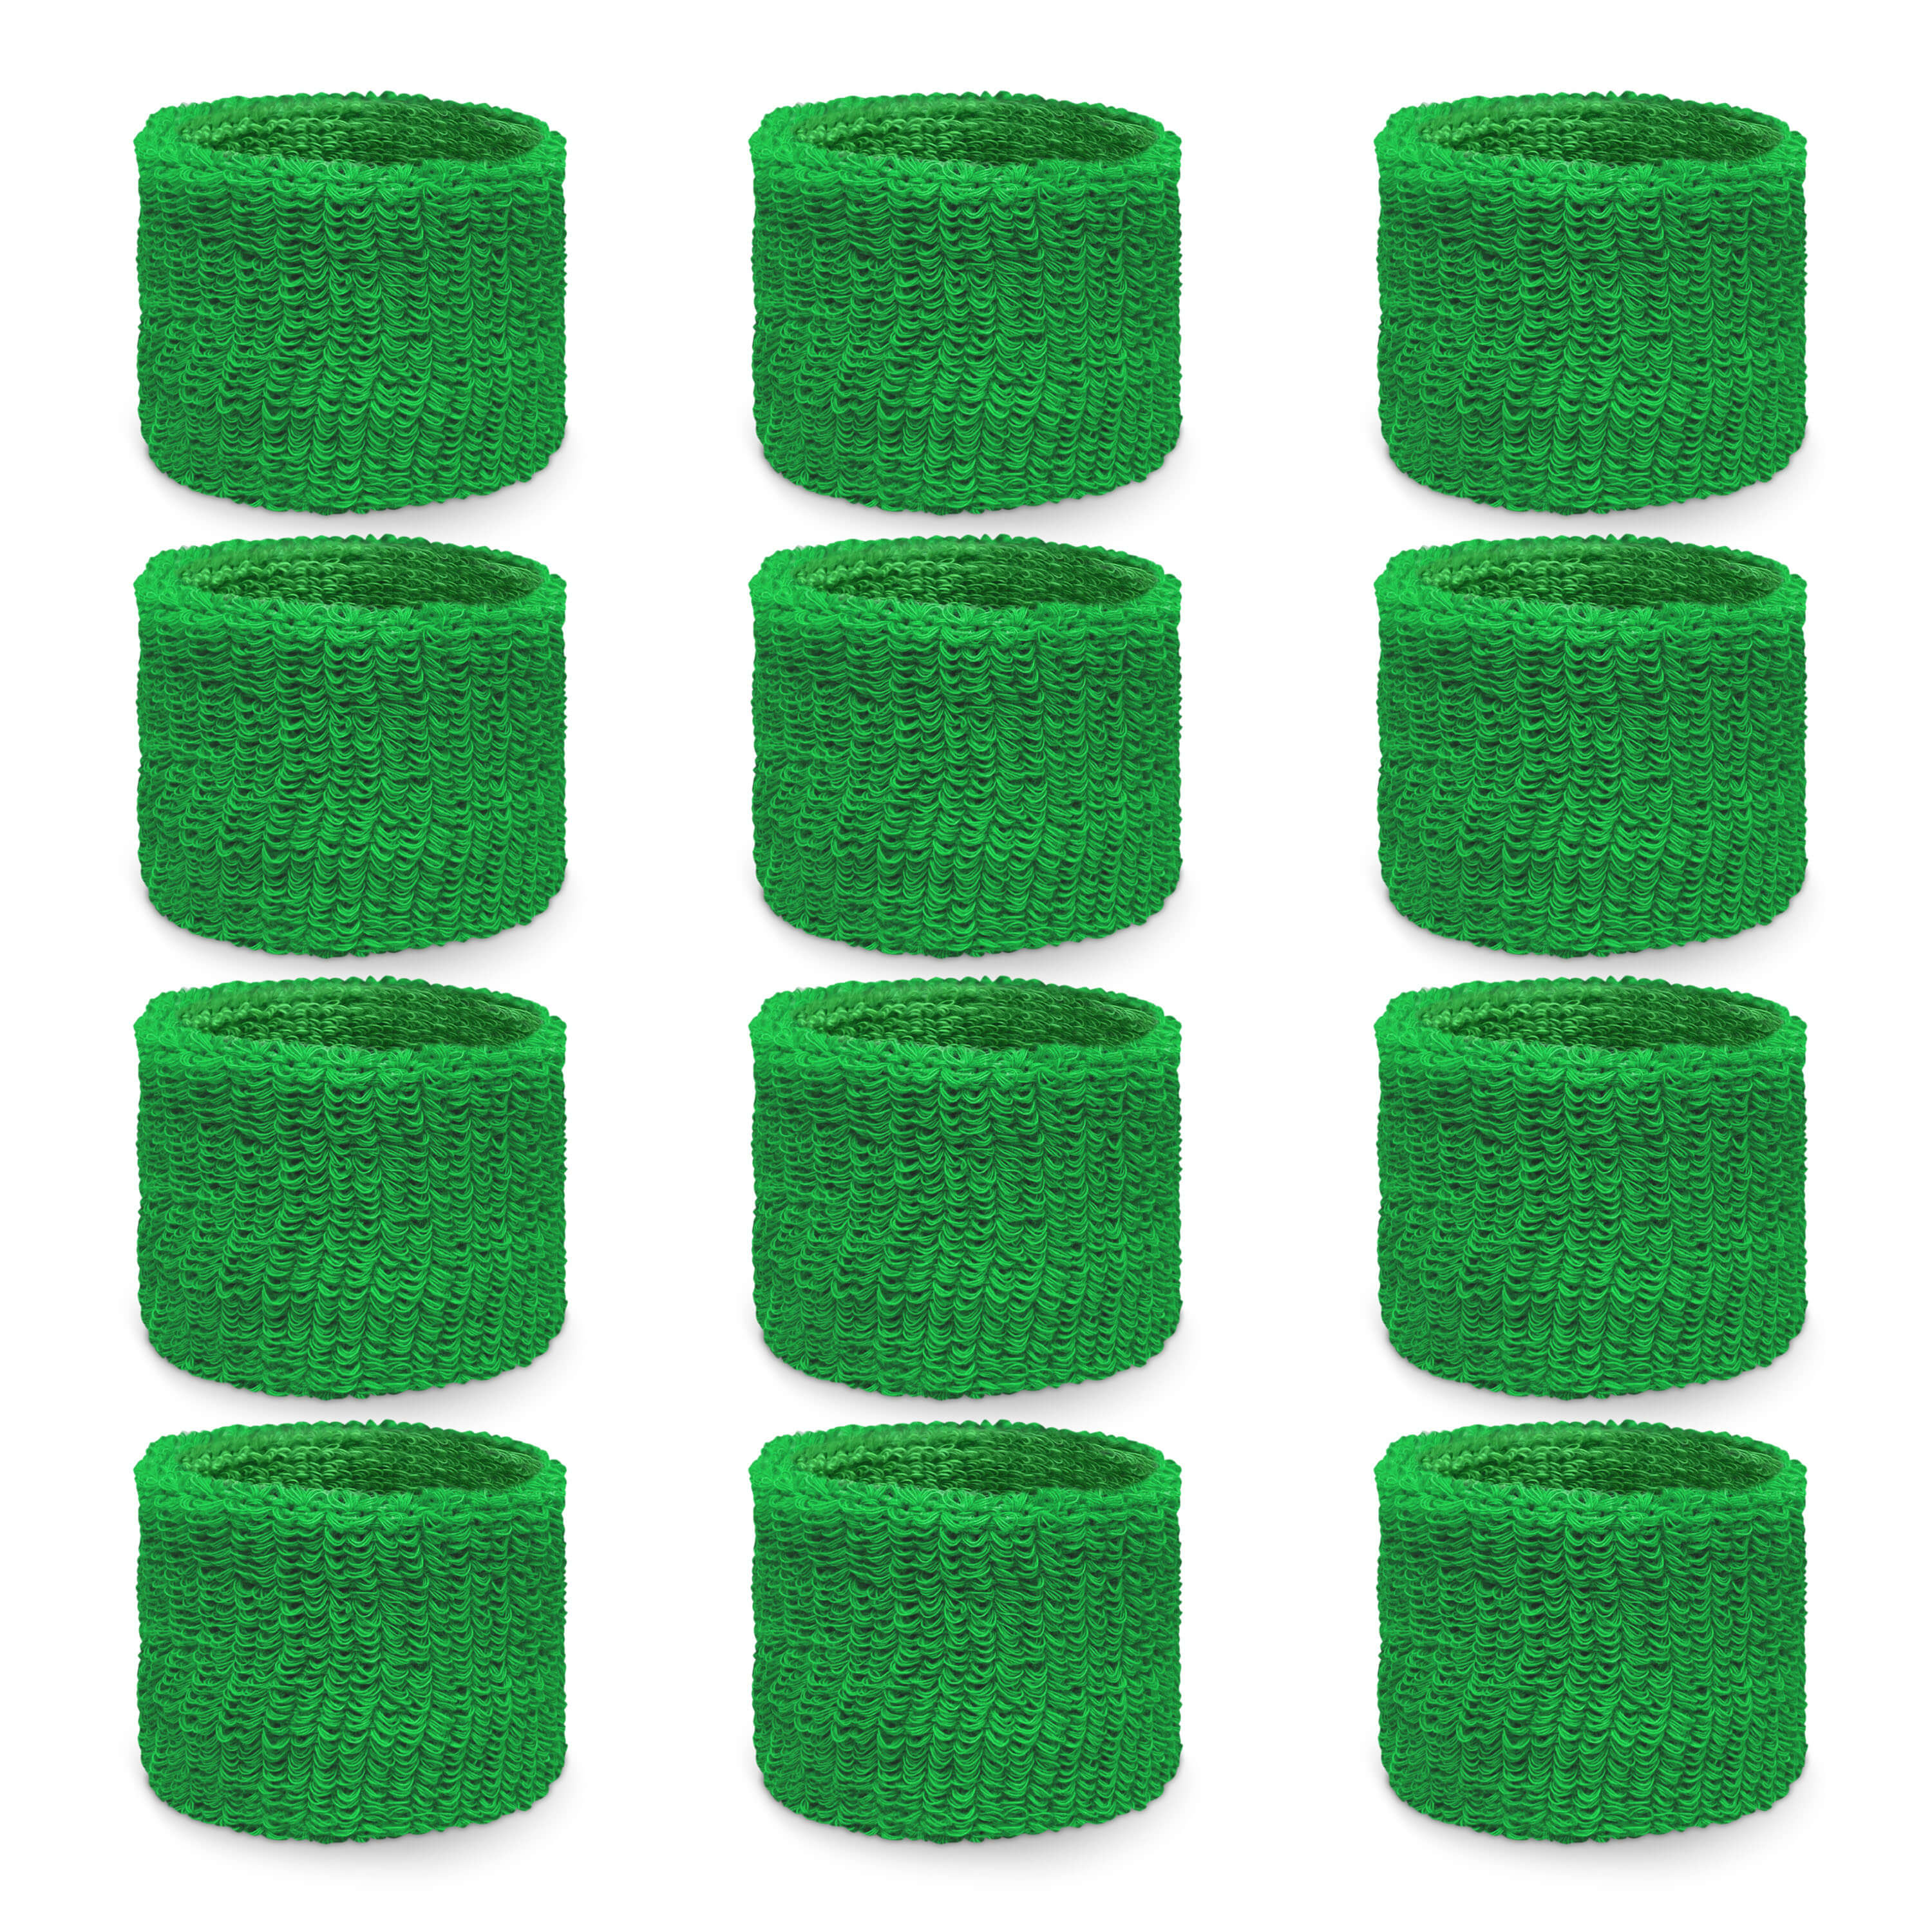 Youth Bright Green Wrist bands Plain Style [6pairs]